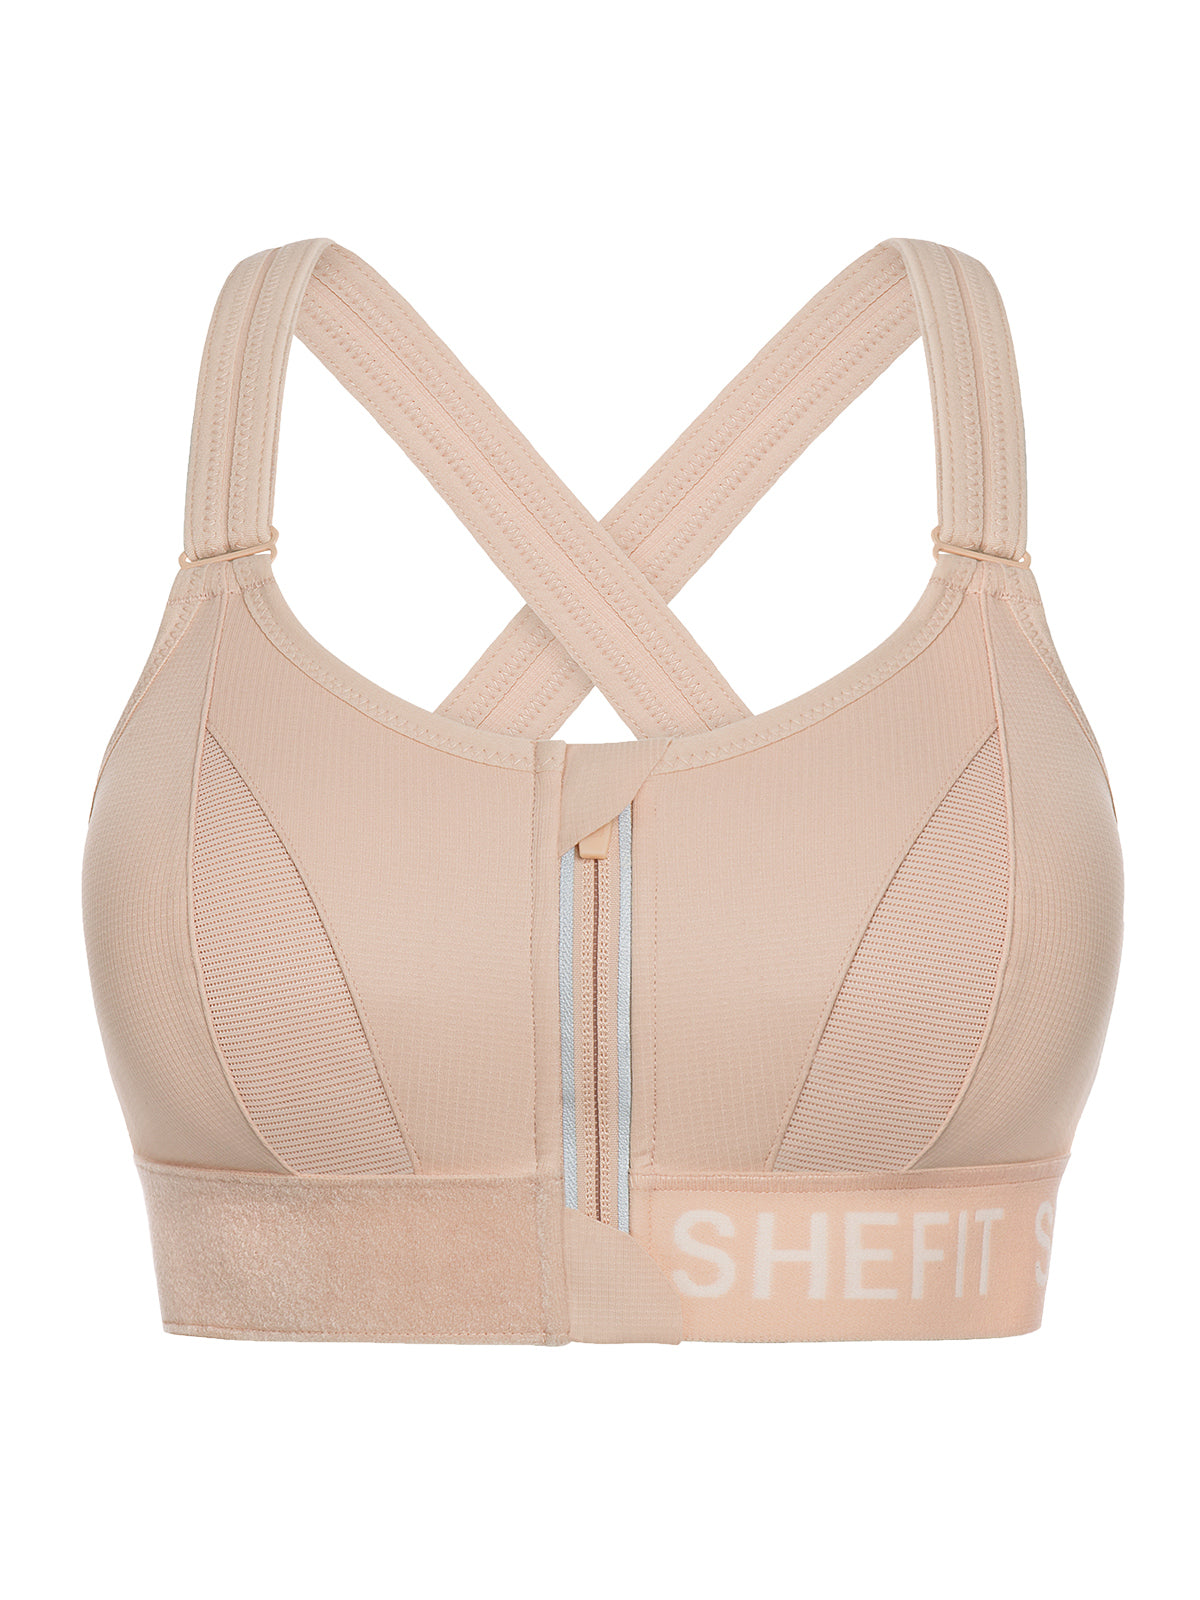 SHEFIT Ultimate Sports Bra Size Luxe New With Tags